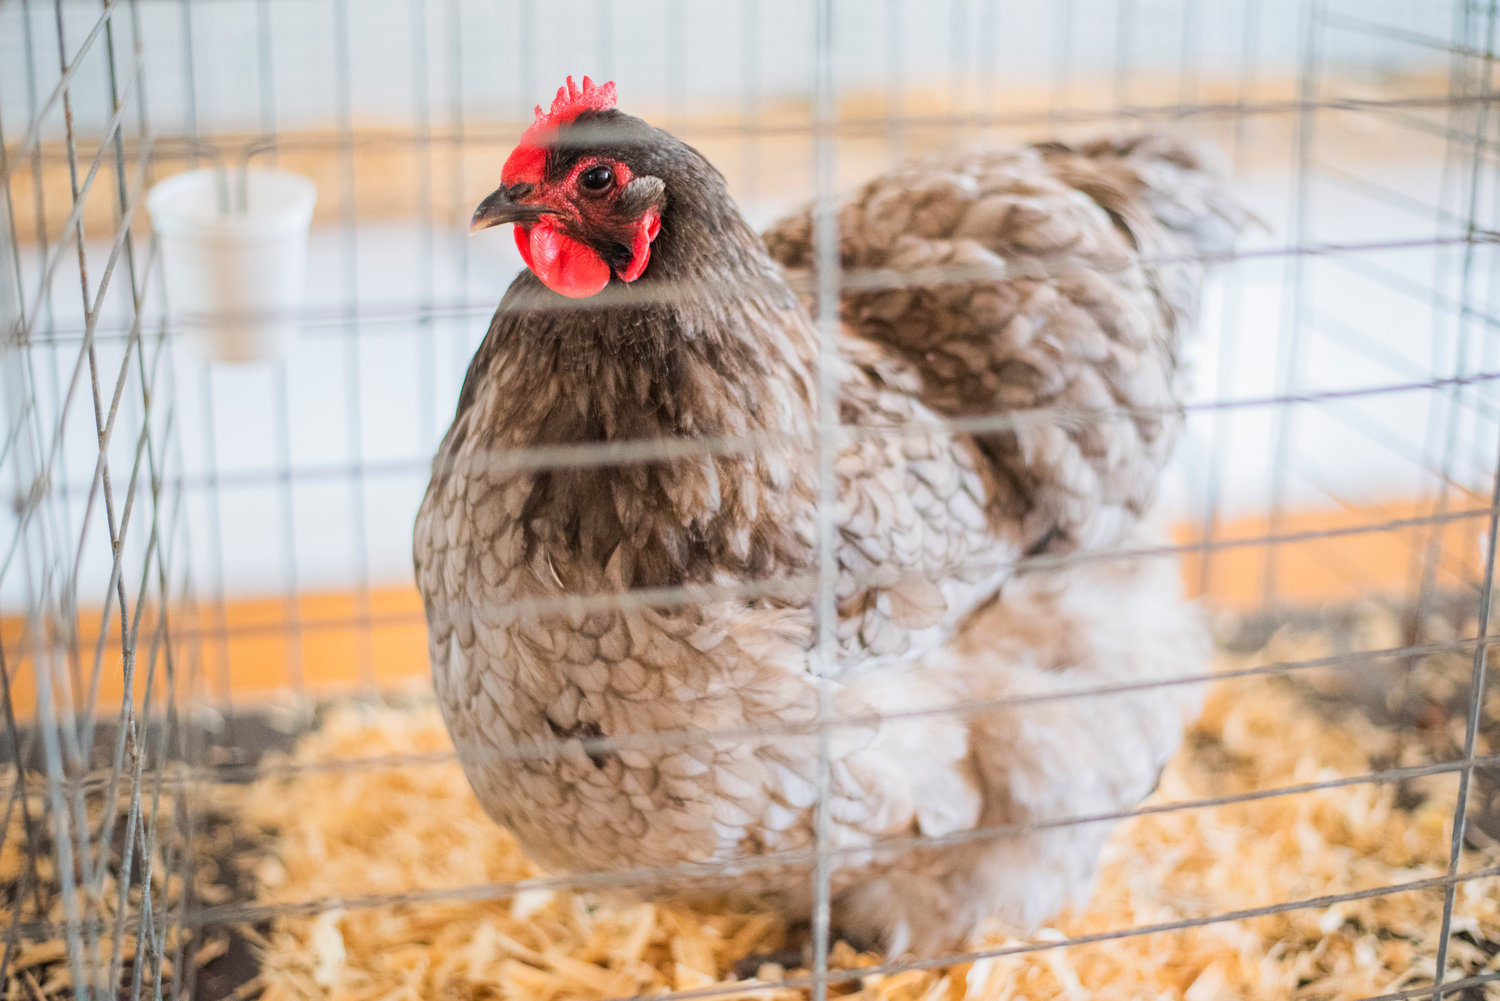 A Blue Orpington hen sits on display at the Southwest Washington Fairgrounds in Centralia Friday morning.